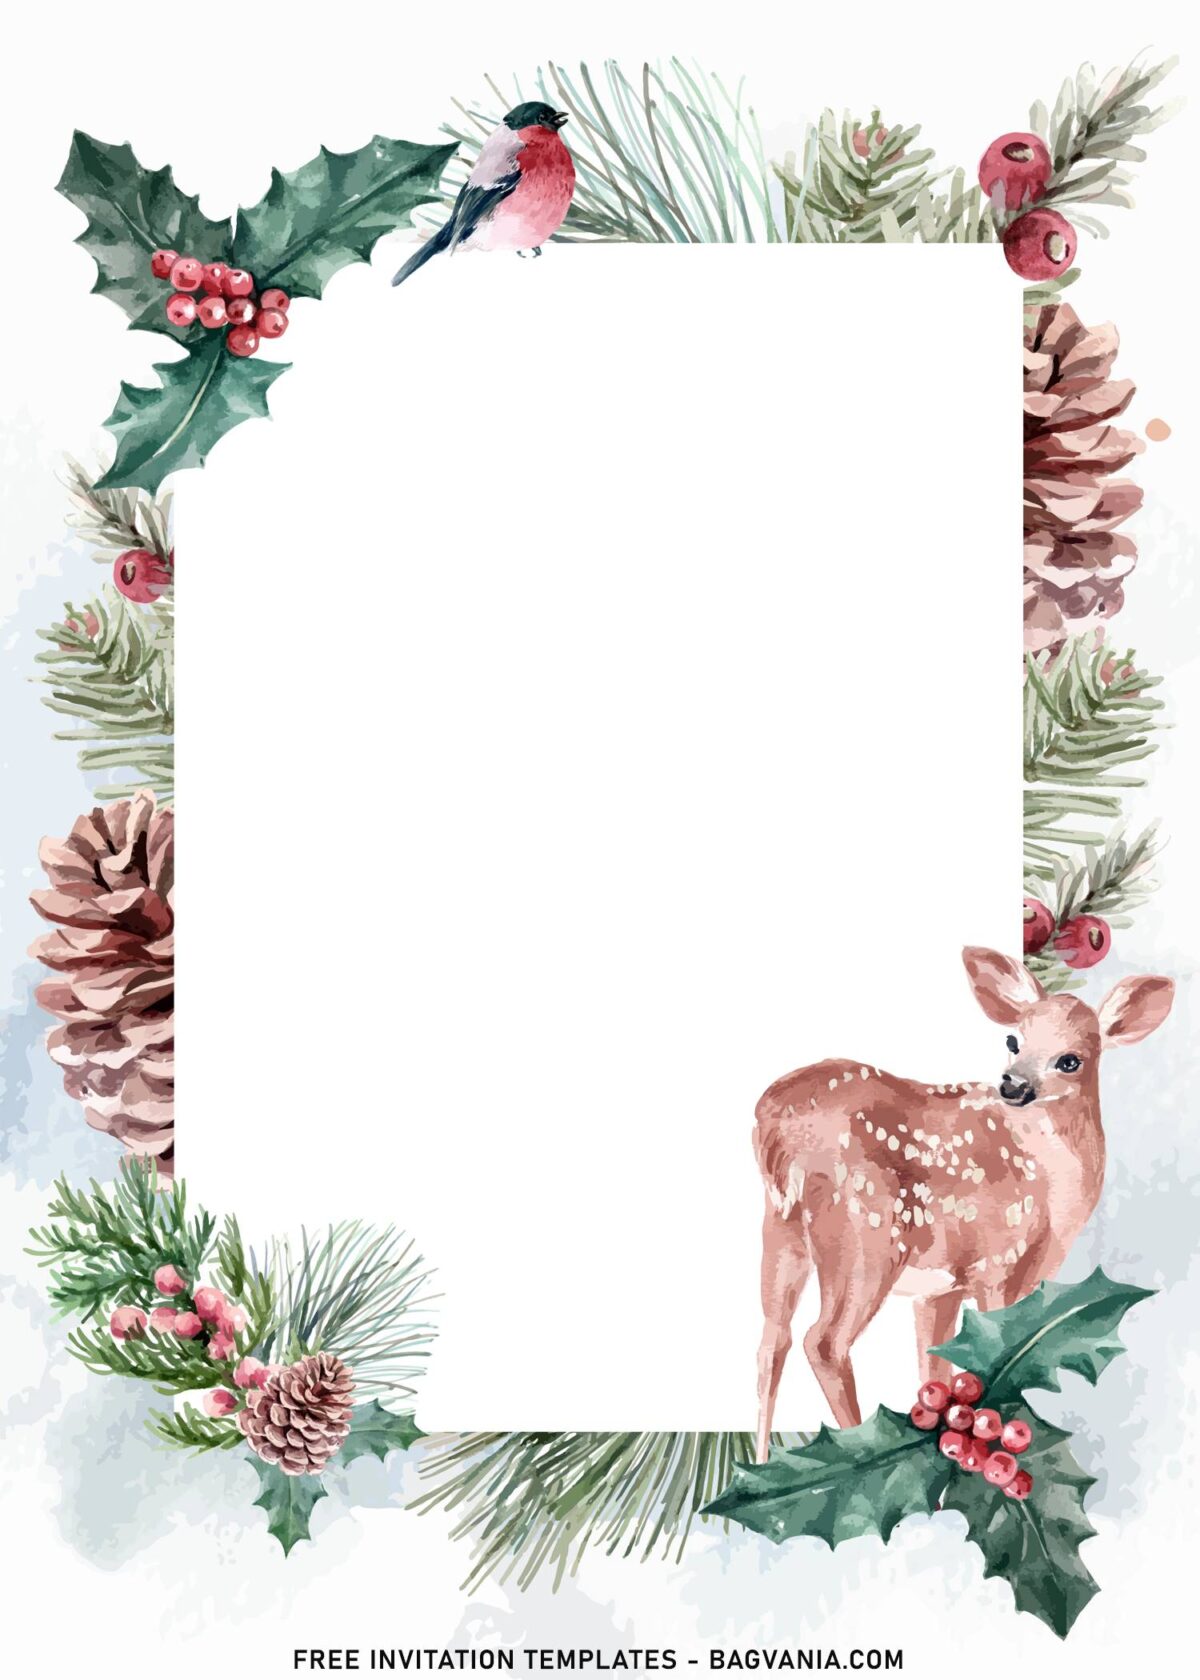 7+ Dusty Winter Floral Invitation Templates With Forest Deer And Cardinal Bird with winter berry and cardinal bird